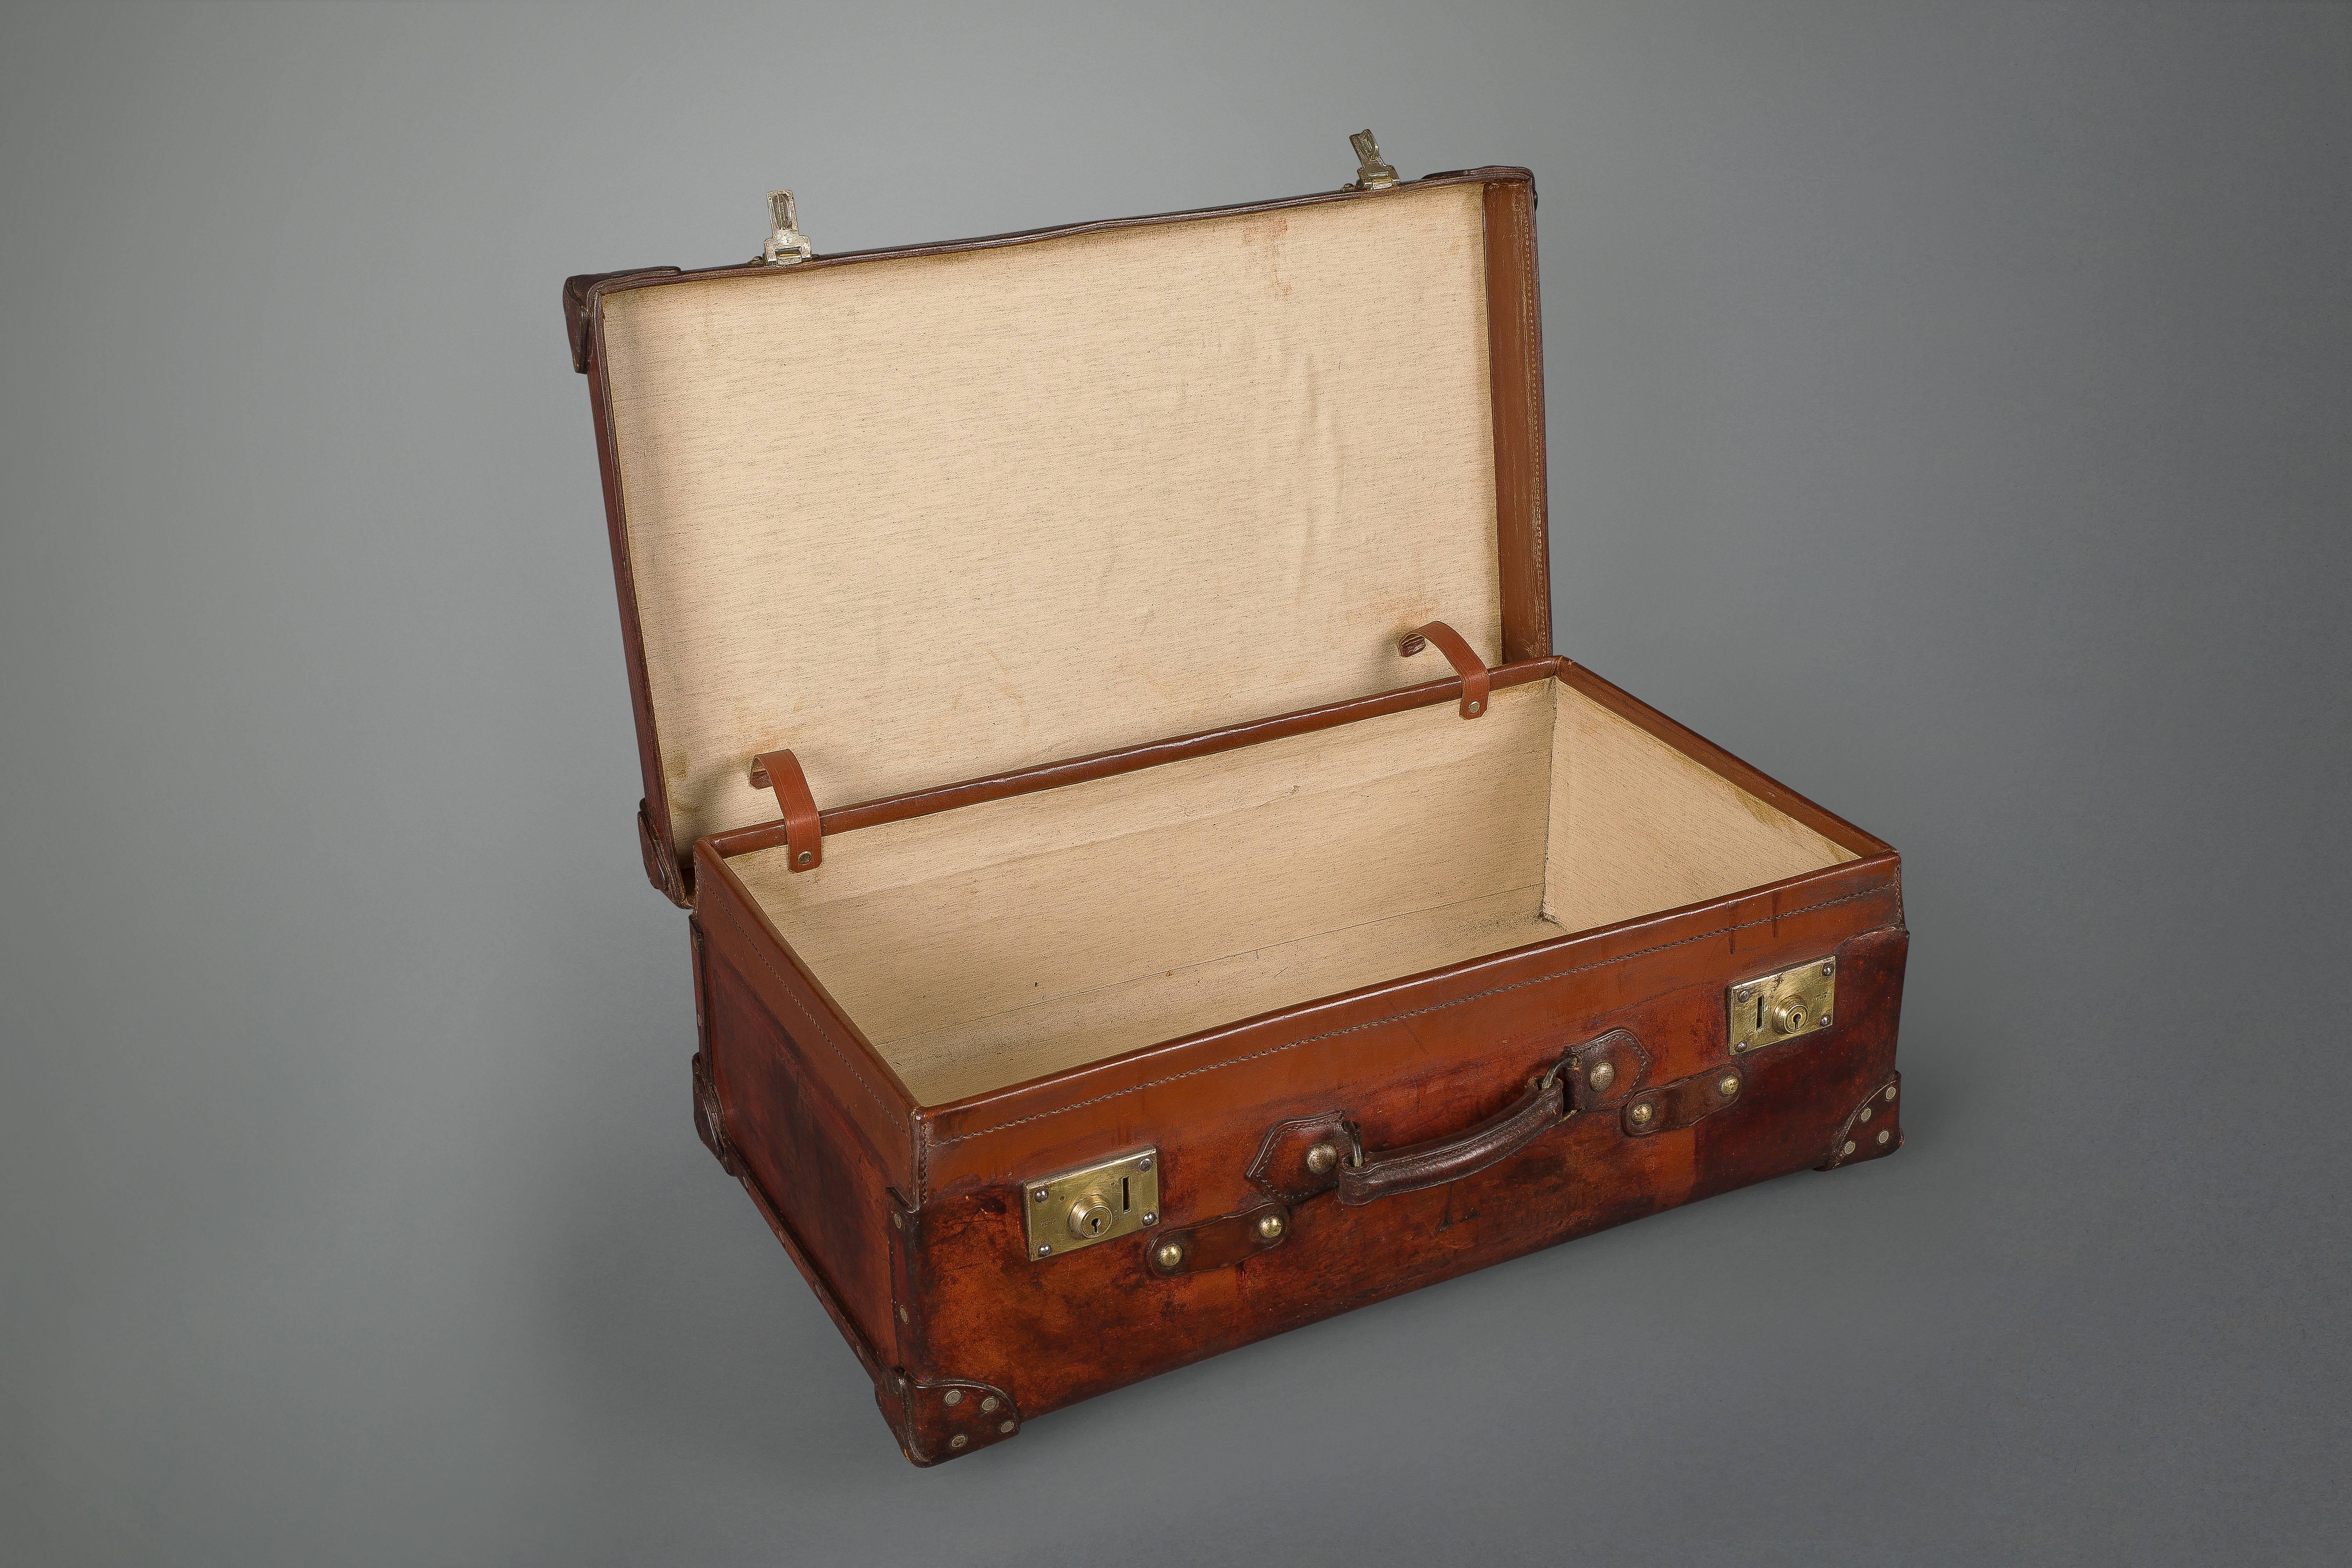 This leather case is one of the finest quality and of late 19th century manufacture.
   